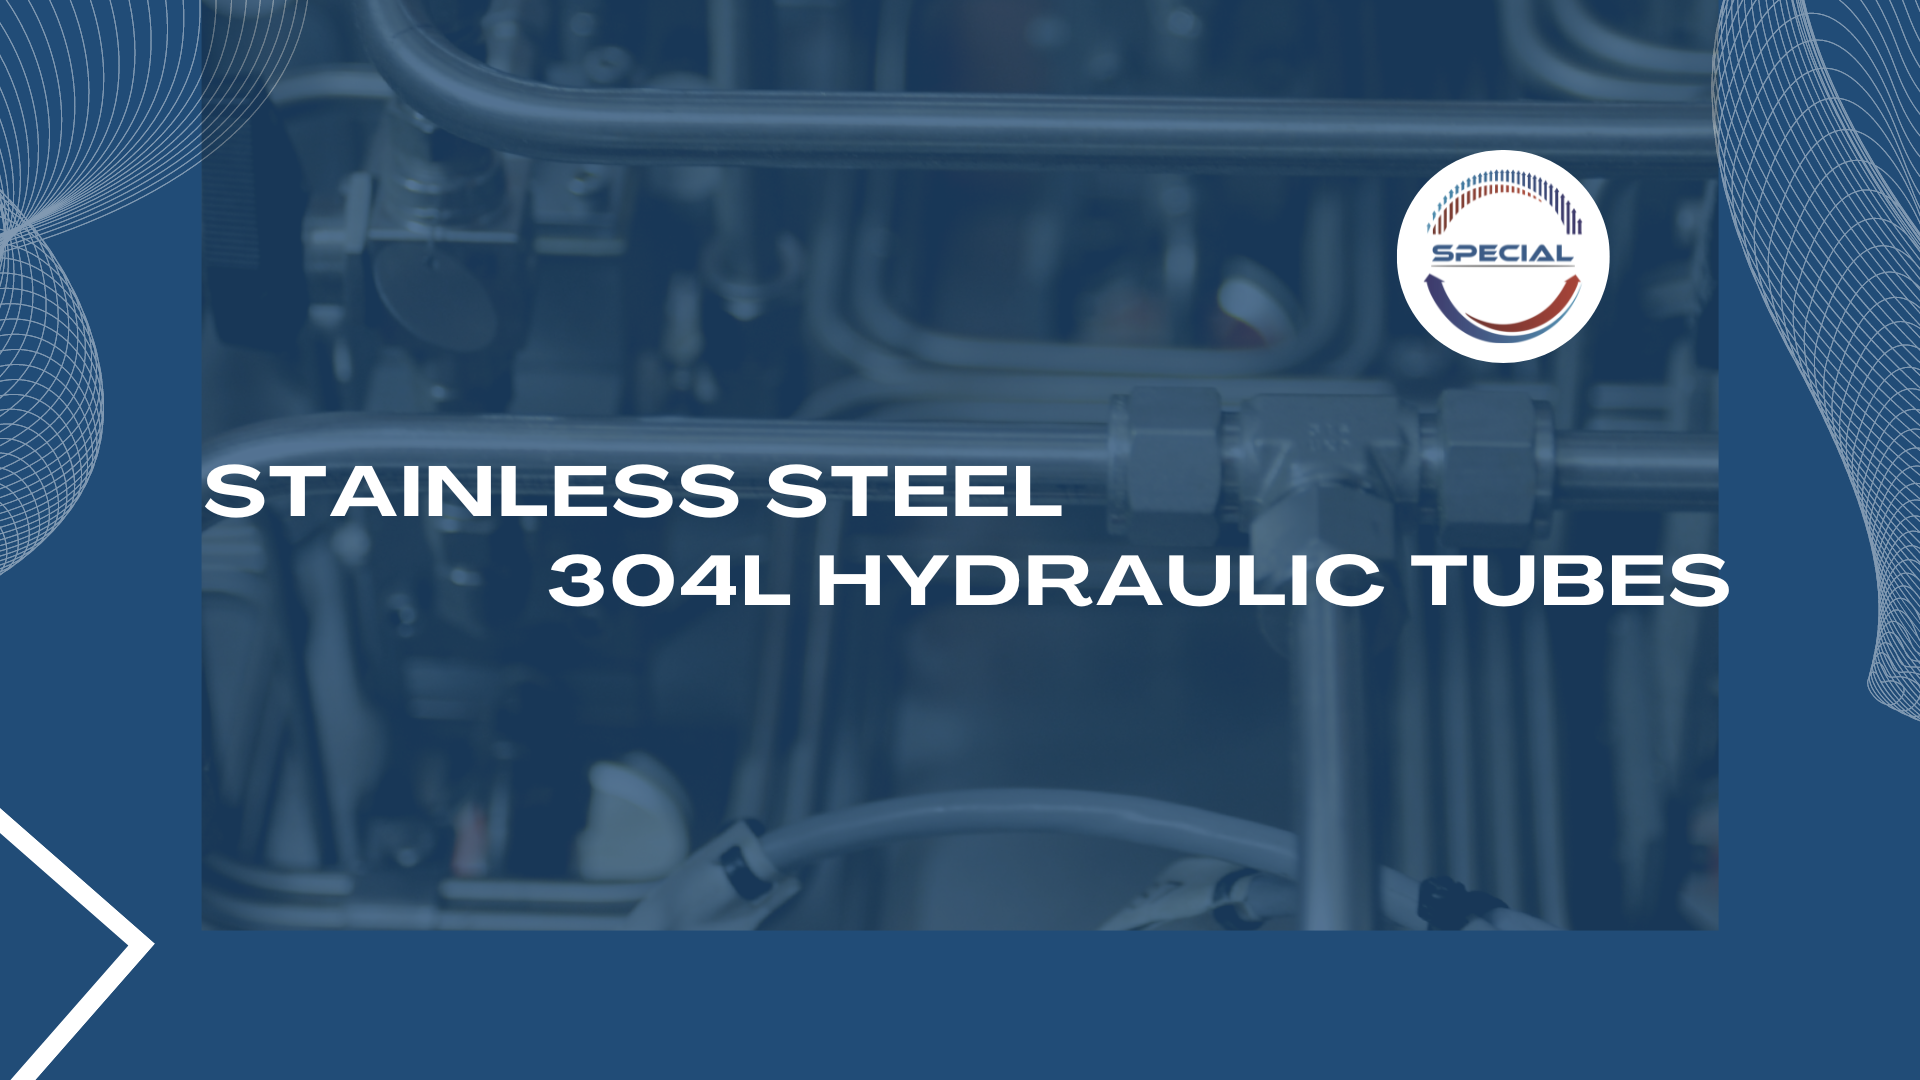 Stainless steel 304L hydraulic tubes